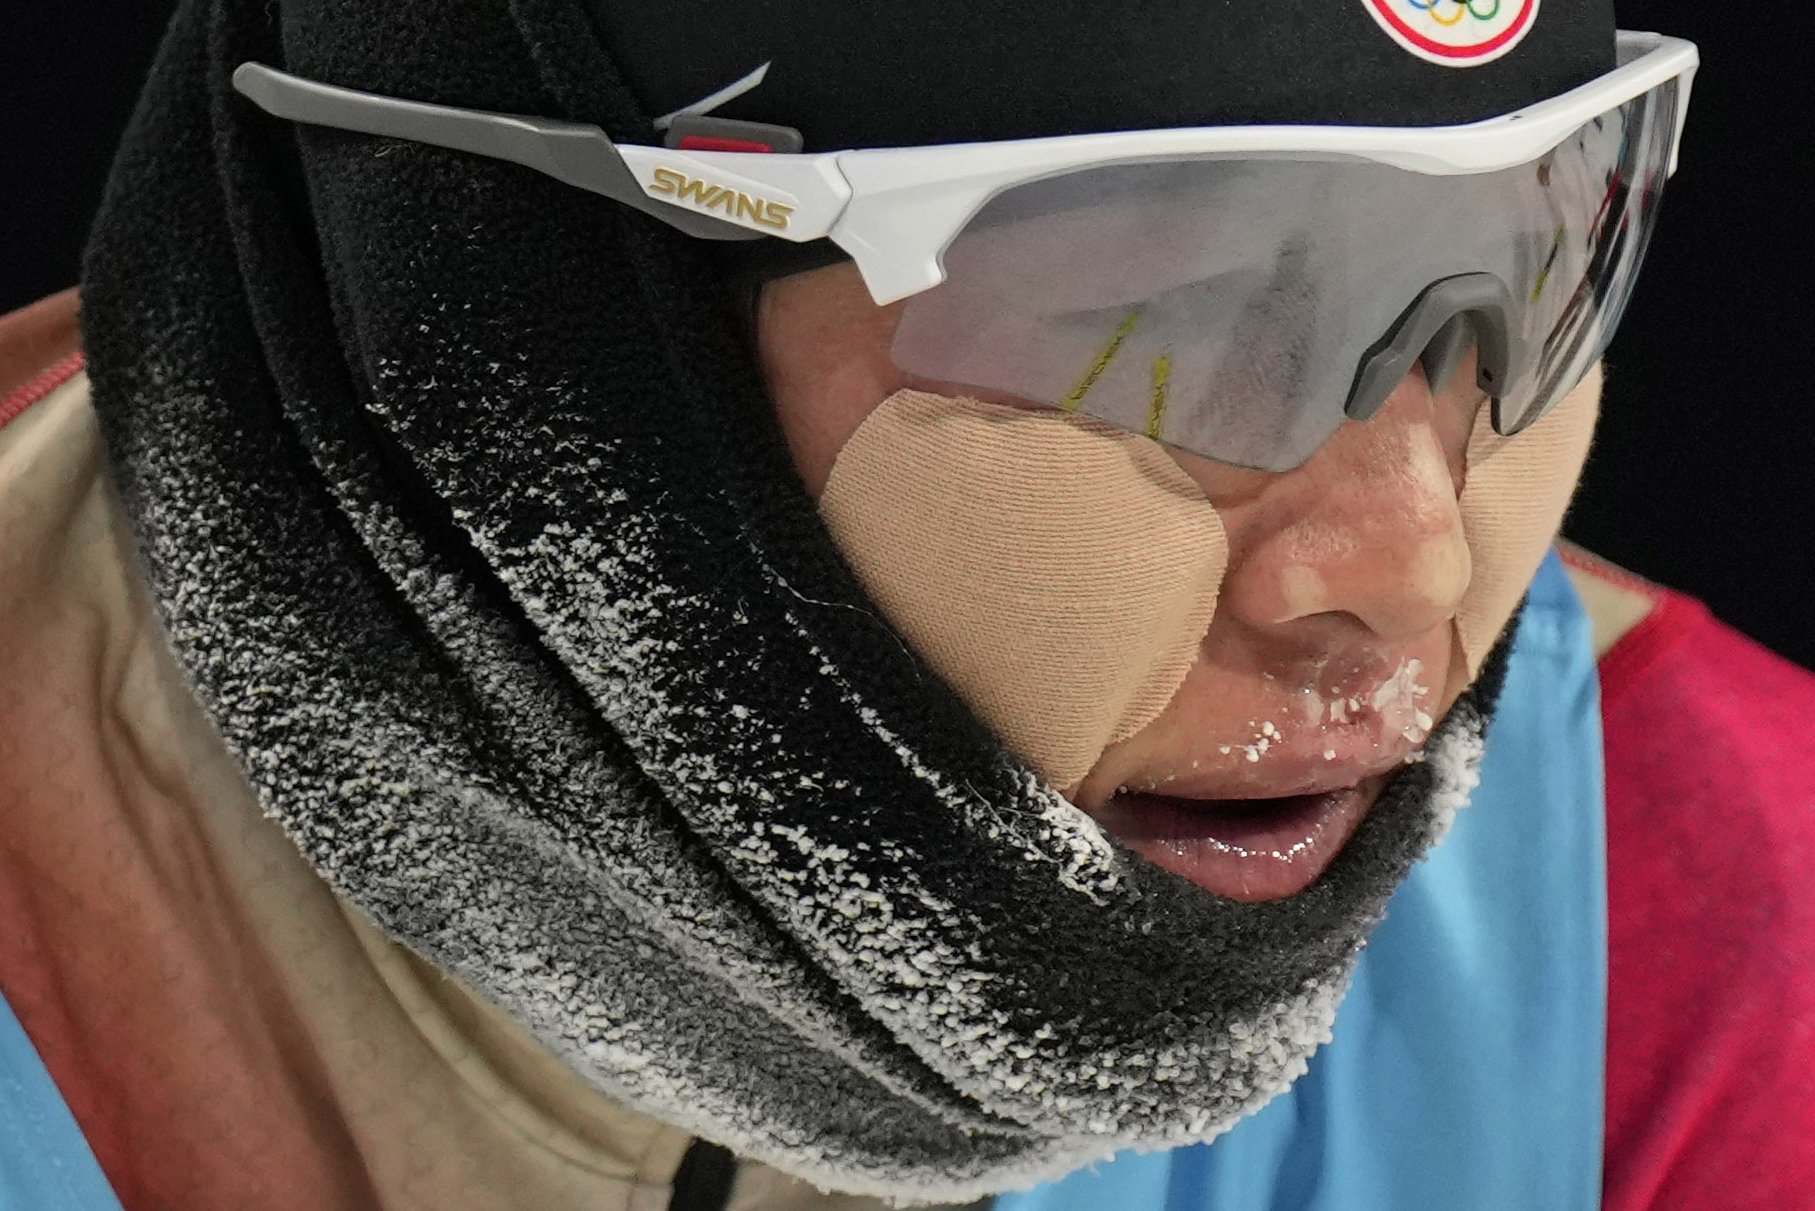  Japan's Ryota Yamamoto reacts after finishing the cross-country skiing portion of the individual Gundersen large hill/10km competition at the 2022 Winter Olympics, Tuesday, Feb. 15, 2022, in Zhangjiakou, China. (AP Photo/Alessandra Tarantino) 